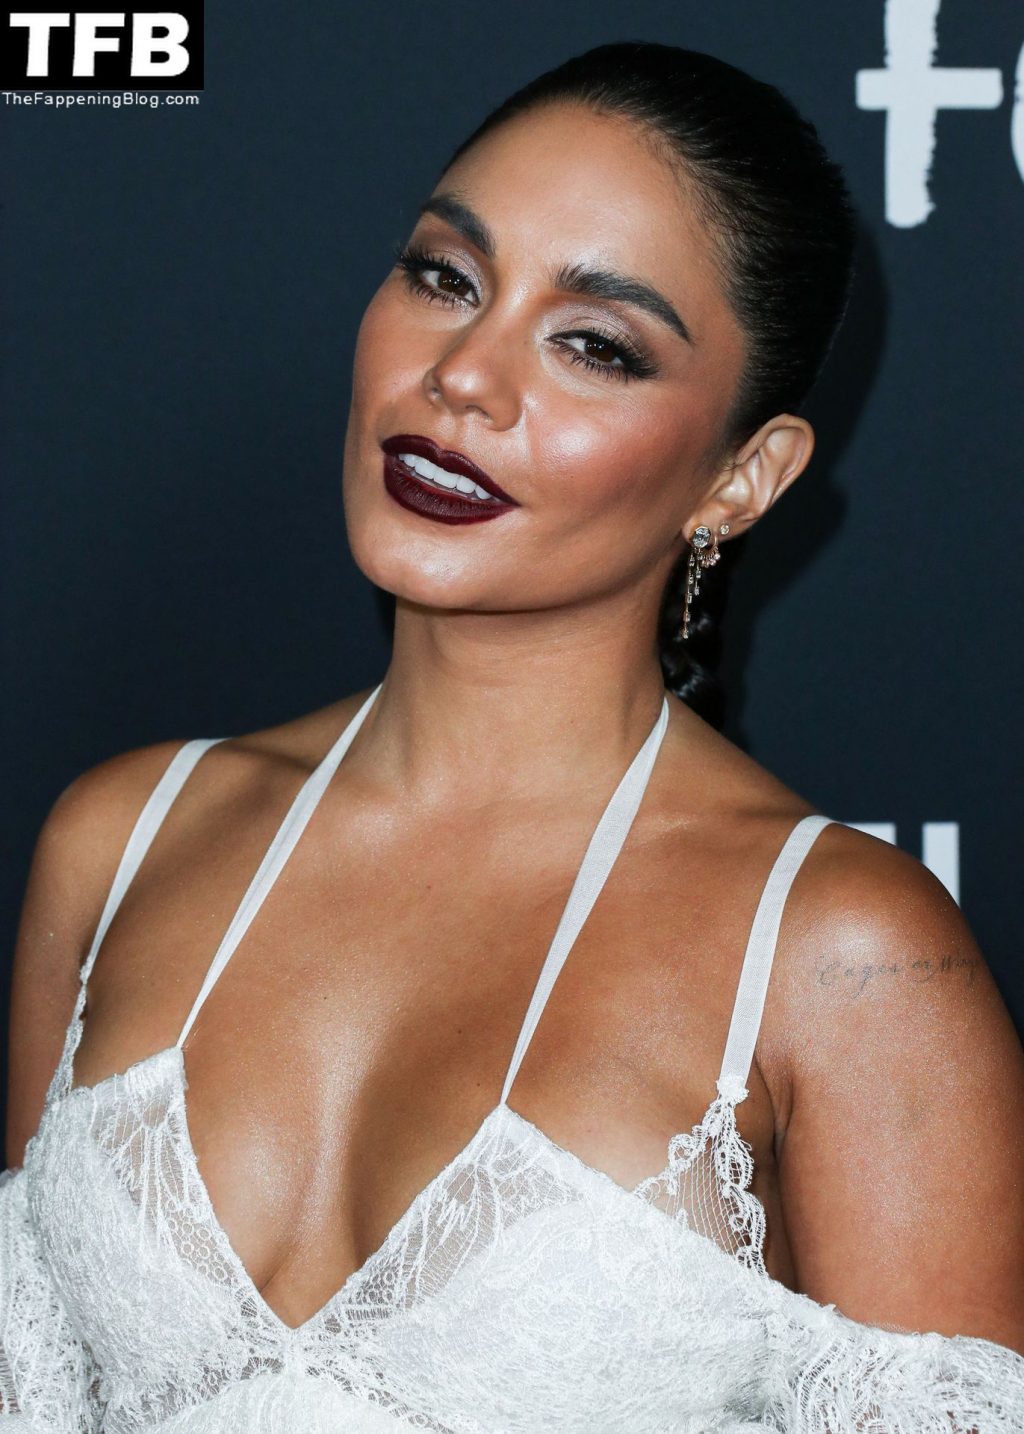 Vanessa Hudgens Flaunts Her Sexy Tits at the Netflix’s “tick, tick…BOOM” Premiere in Hollywood (150 Photos)